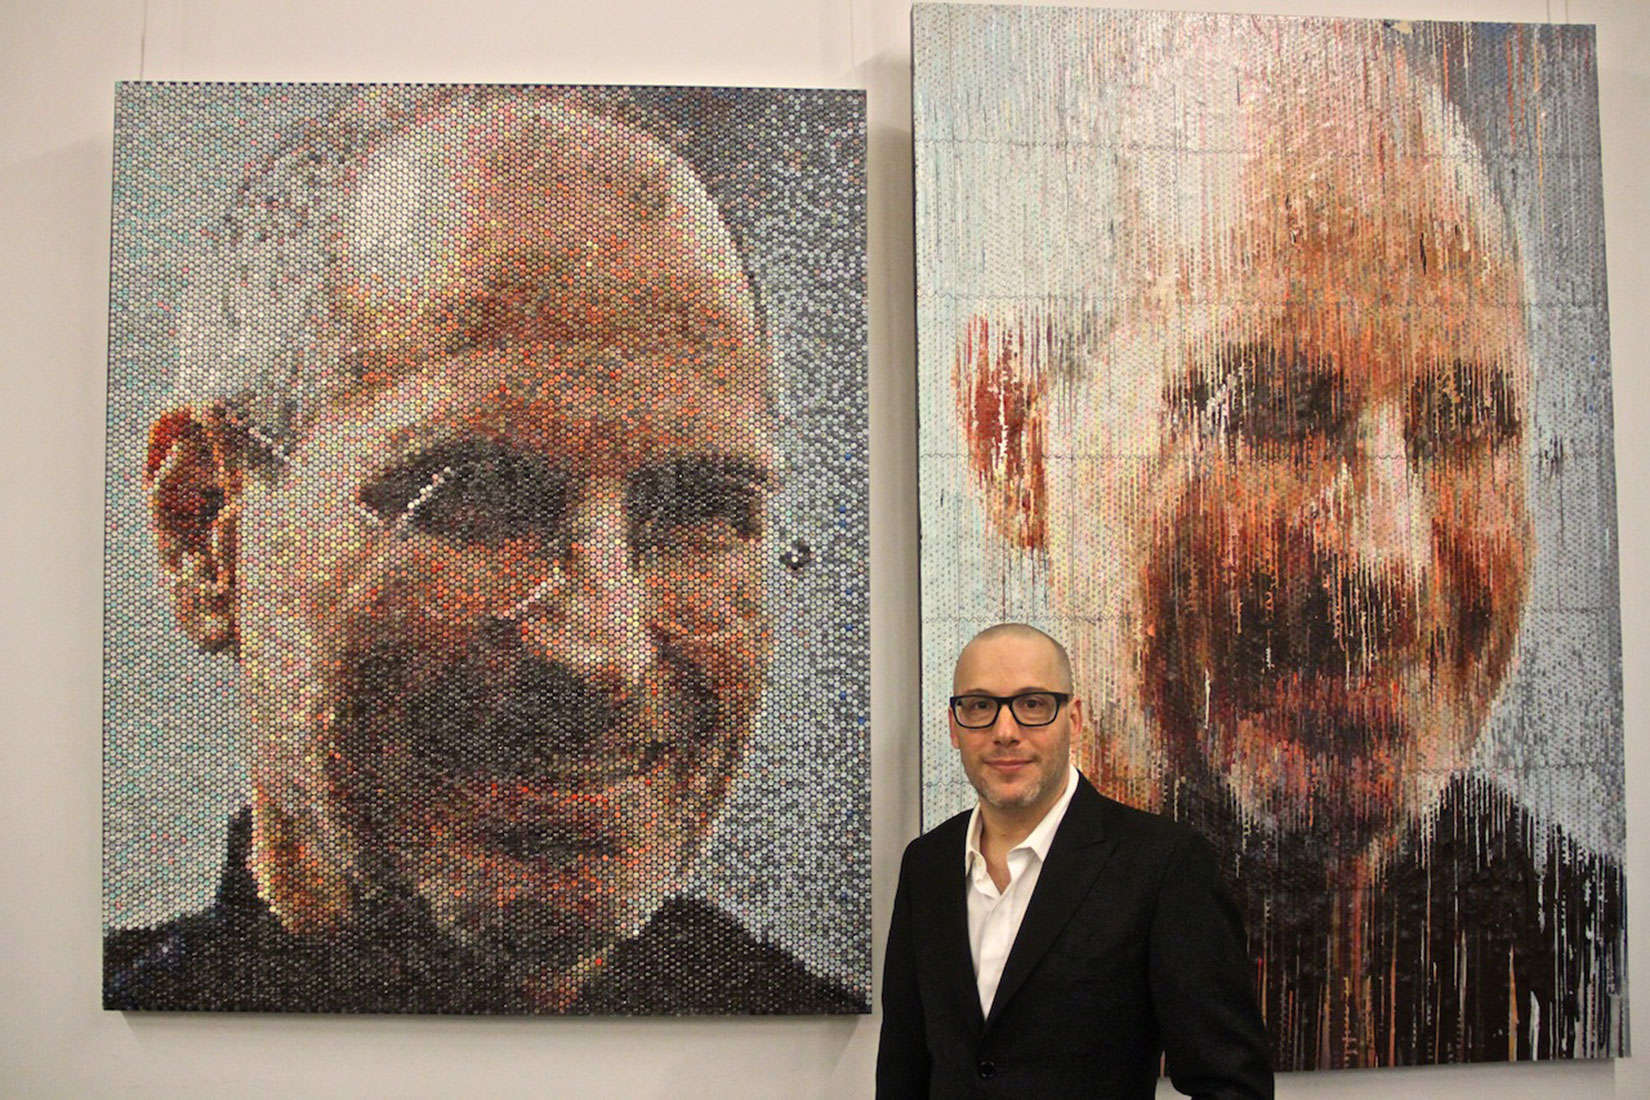 Bradley Hart injects paint into bubble wrap for photo-realistic portraits, like this one of Steve Jobs.